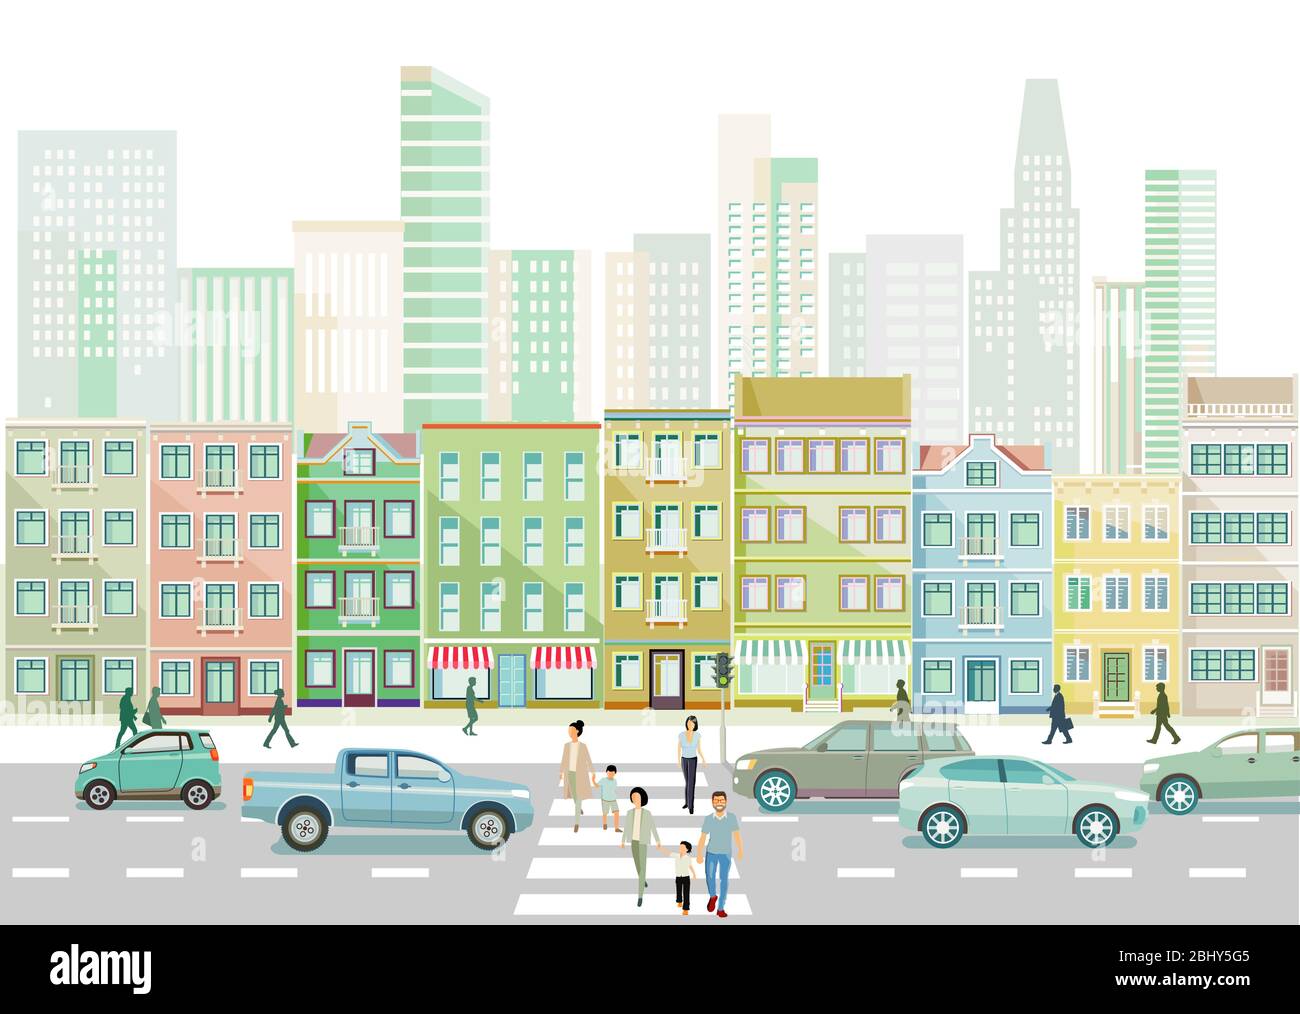 City with traffic, apartment buildings and pedestrians on the sidewalk Stock Vector